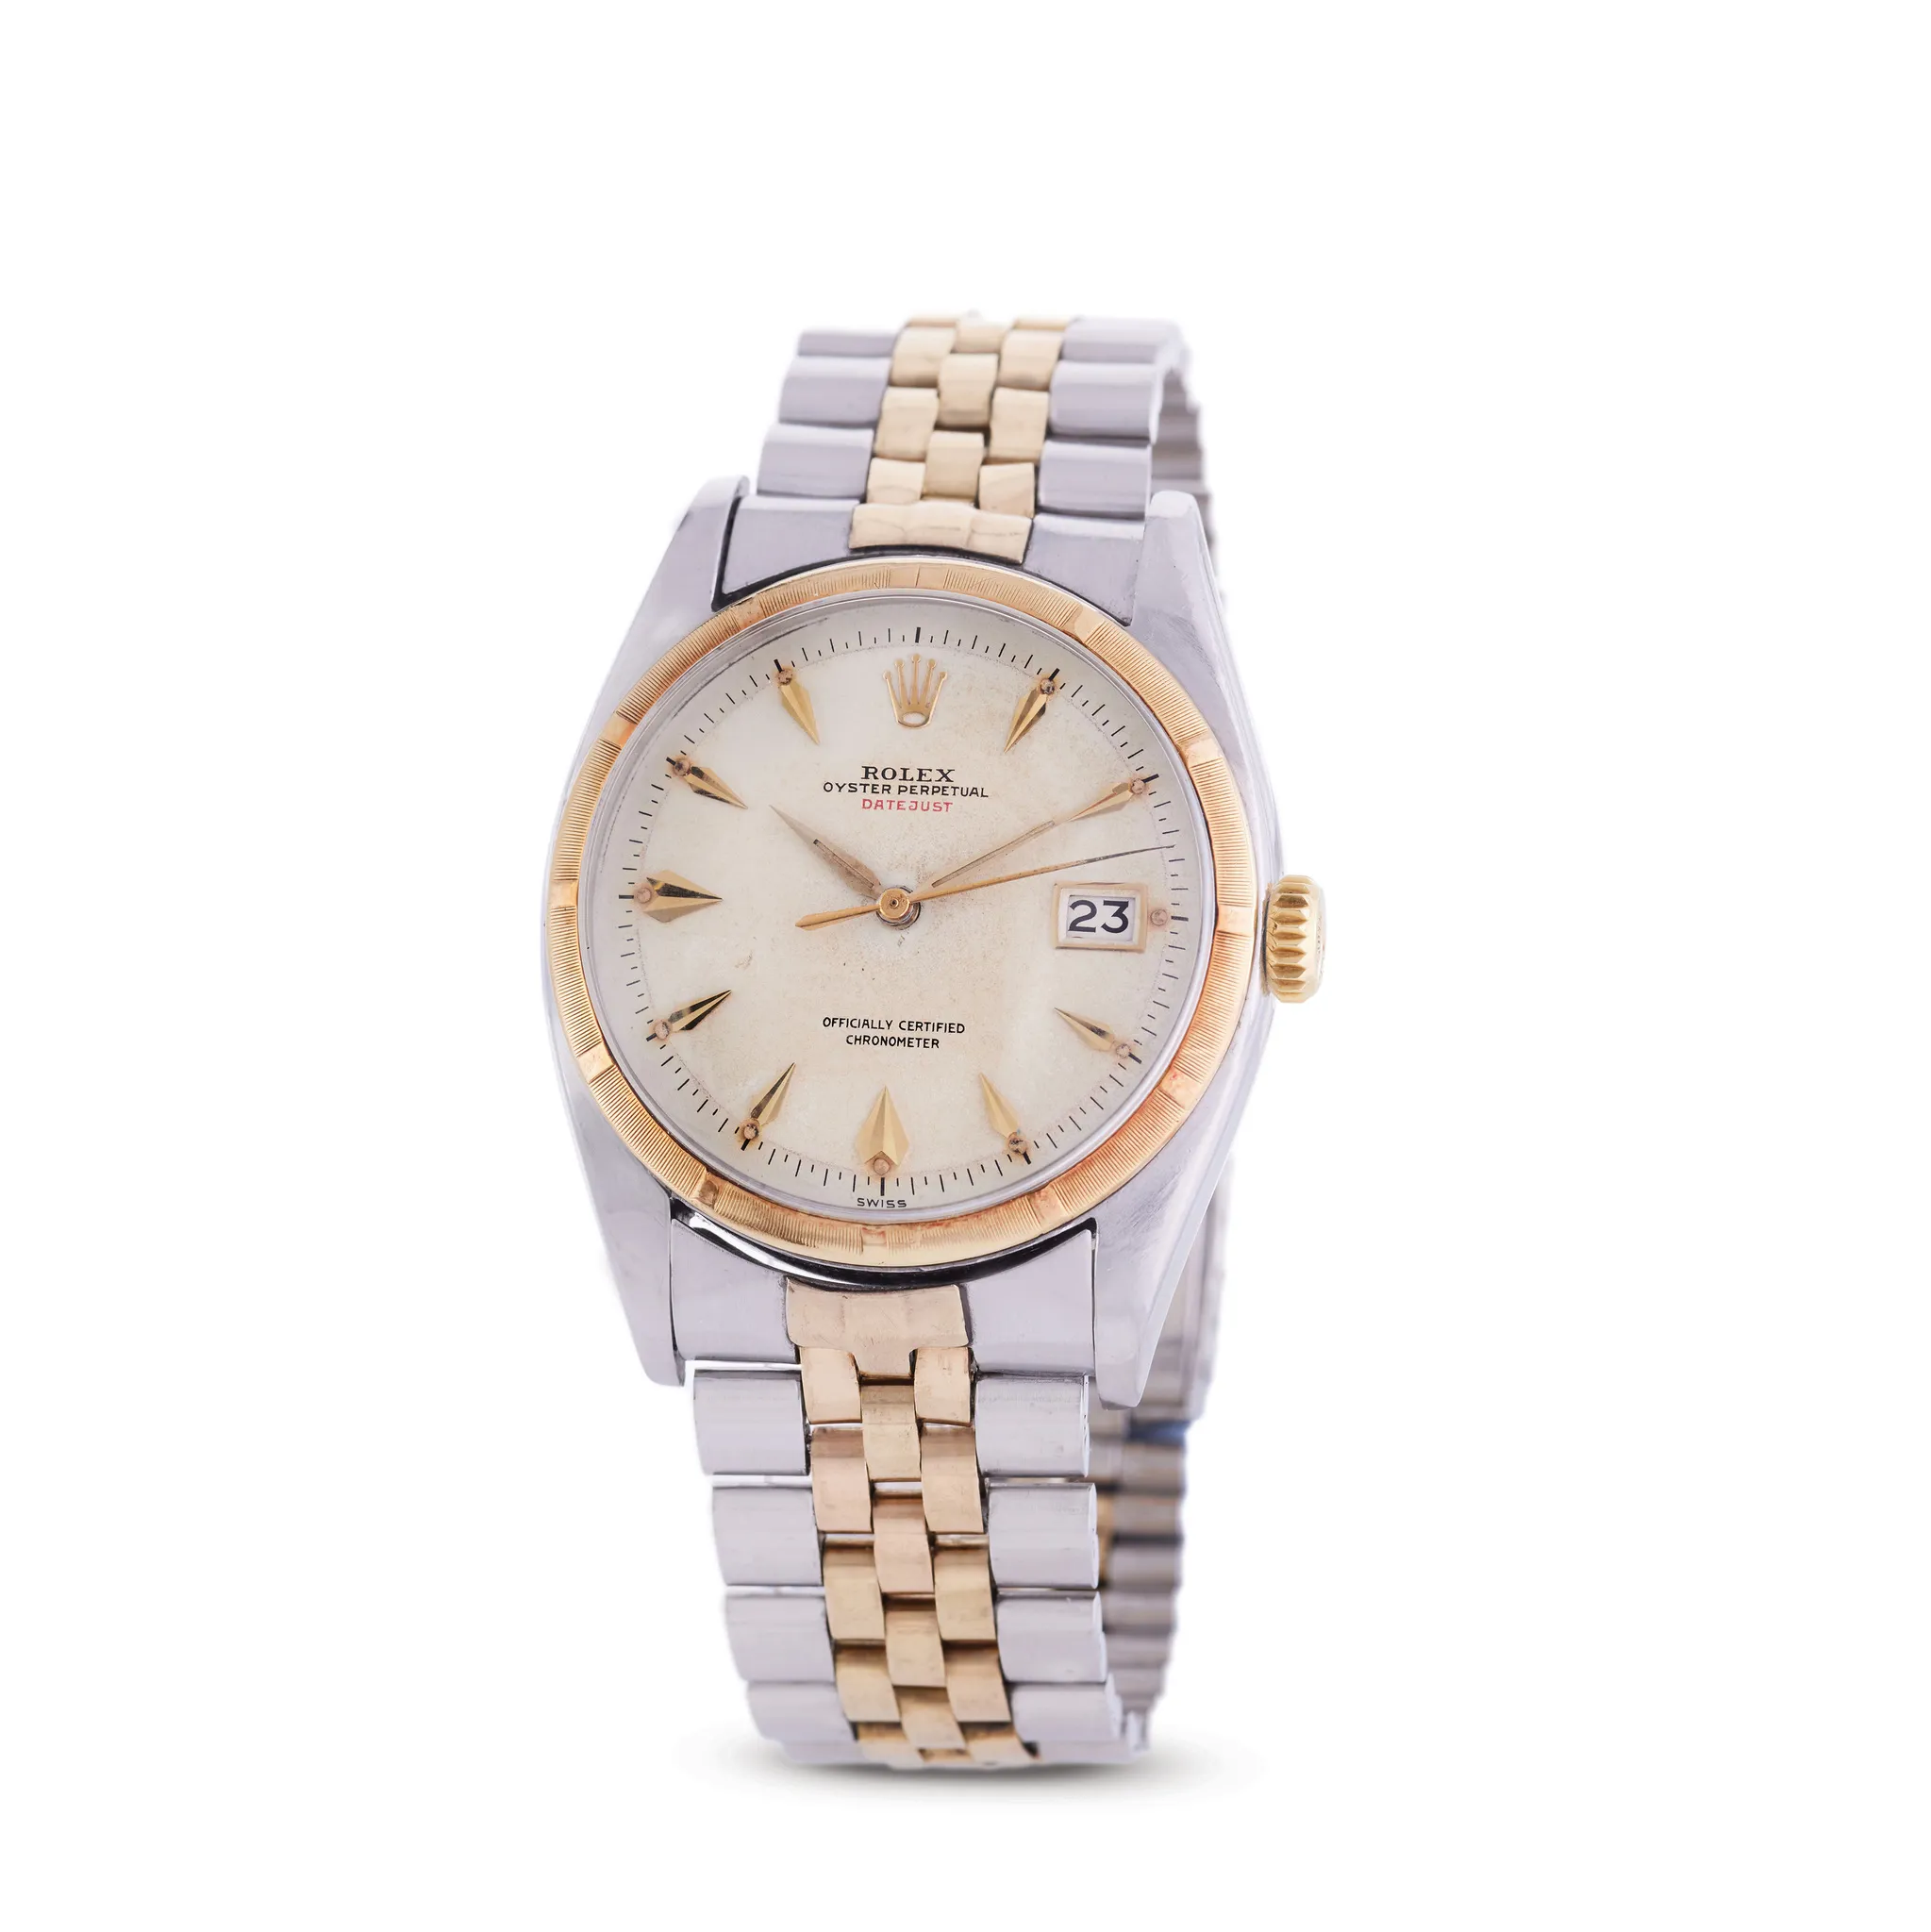 Rolex Datejust 6105 35mm Yellow gold and stainless steel